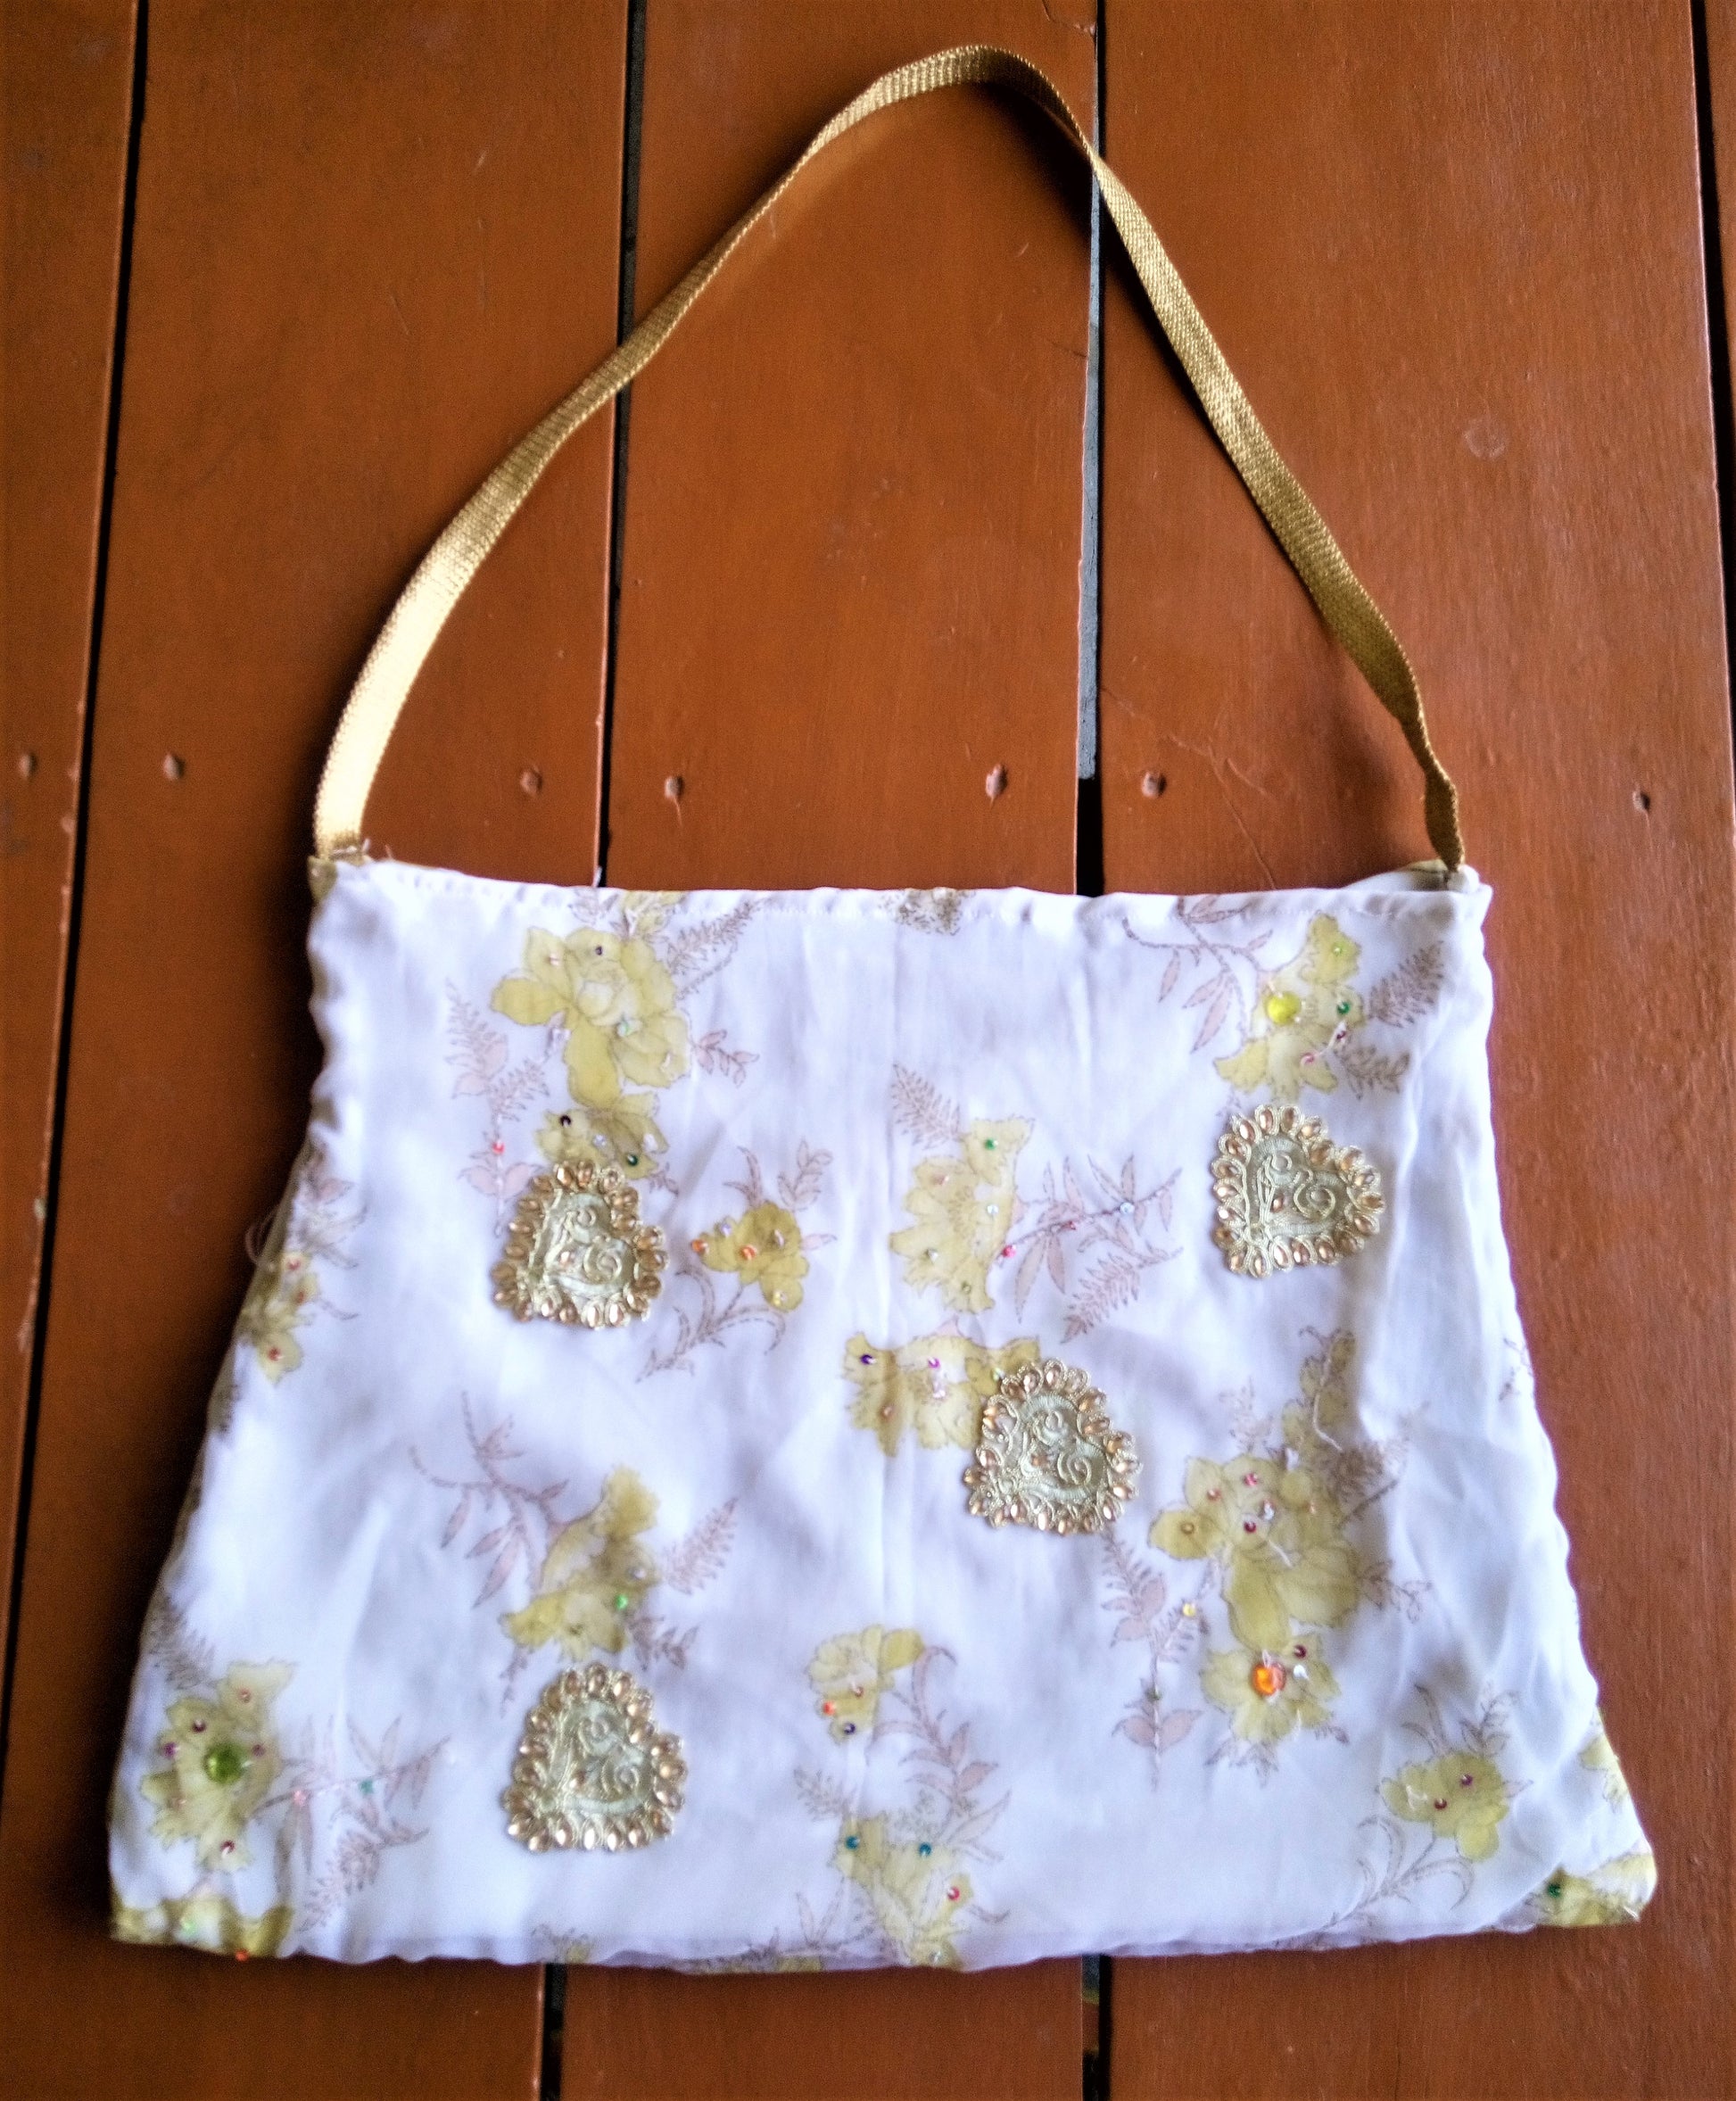 Floral Patchwork Recycled Handmade Bag - GlitterGleam